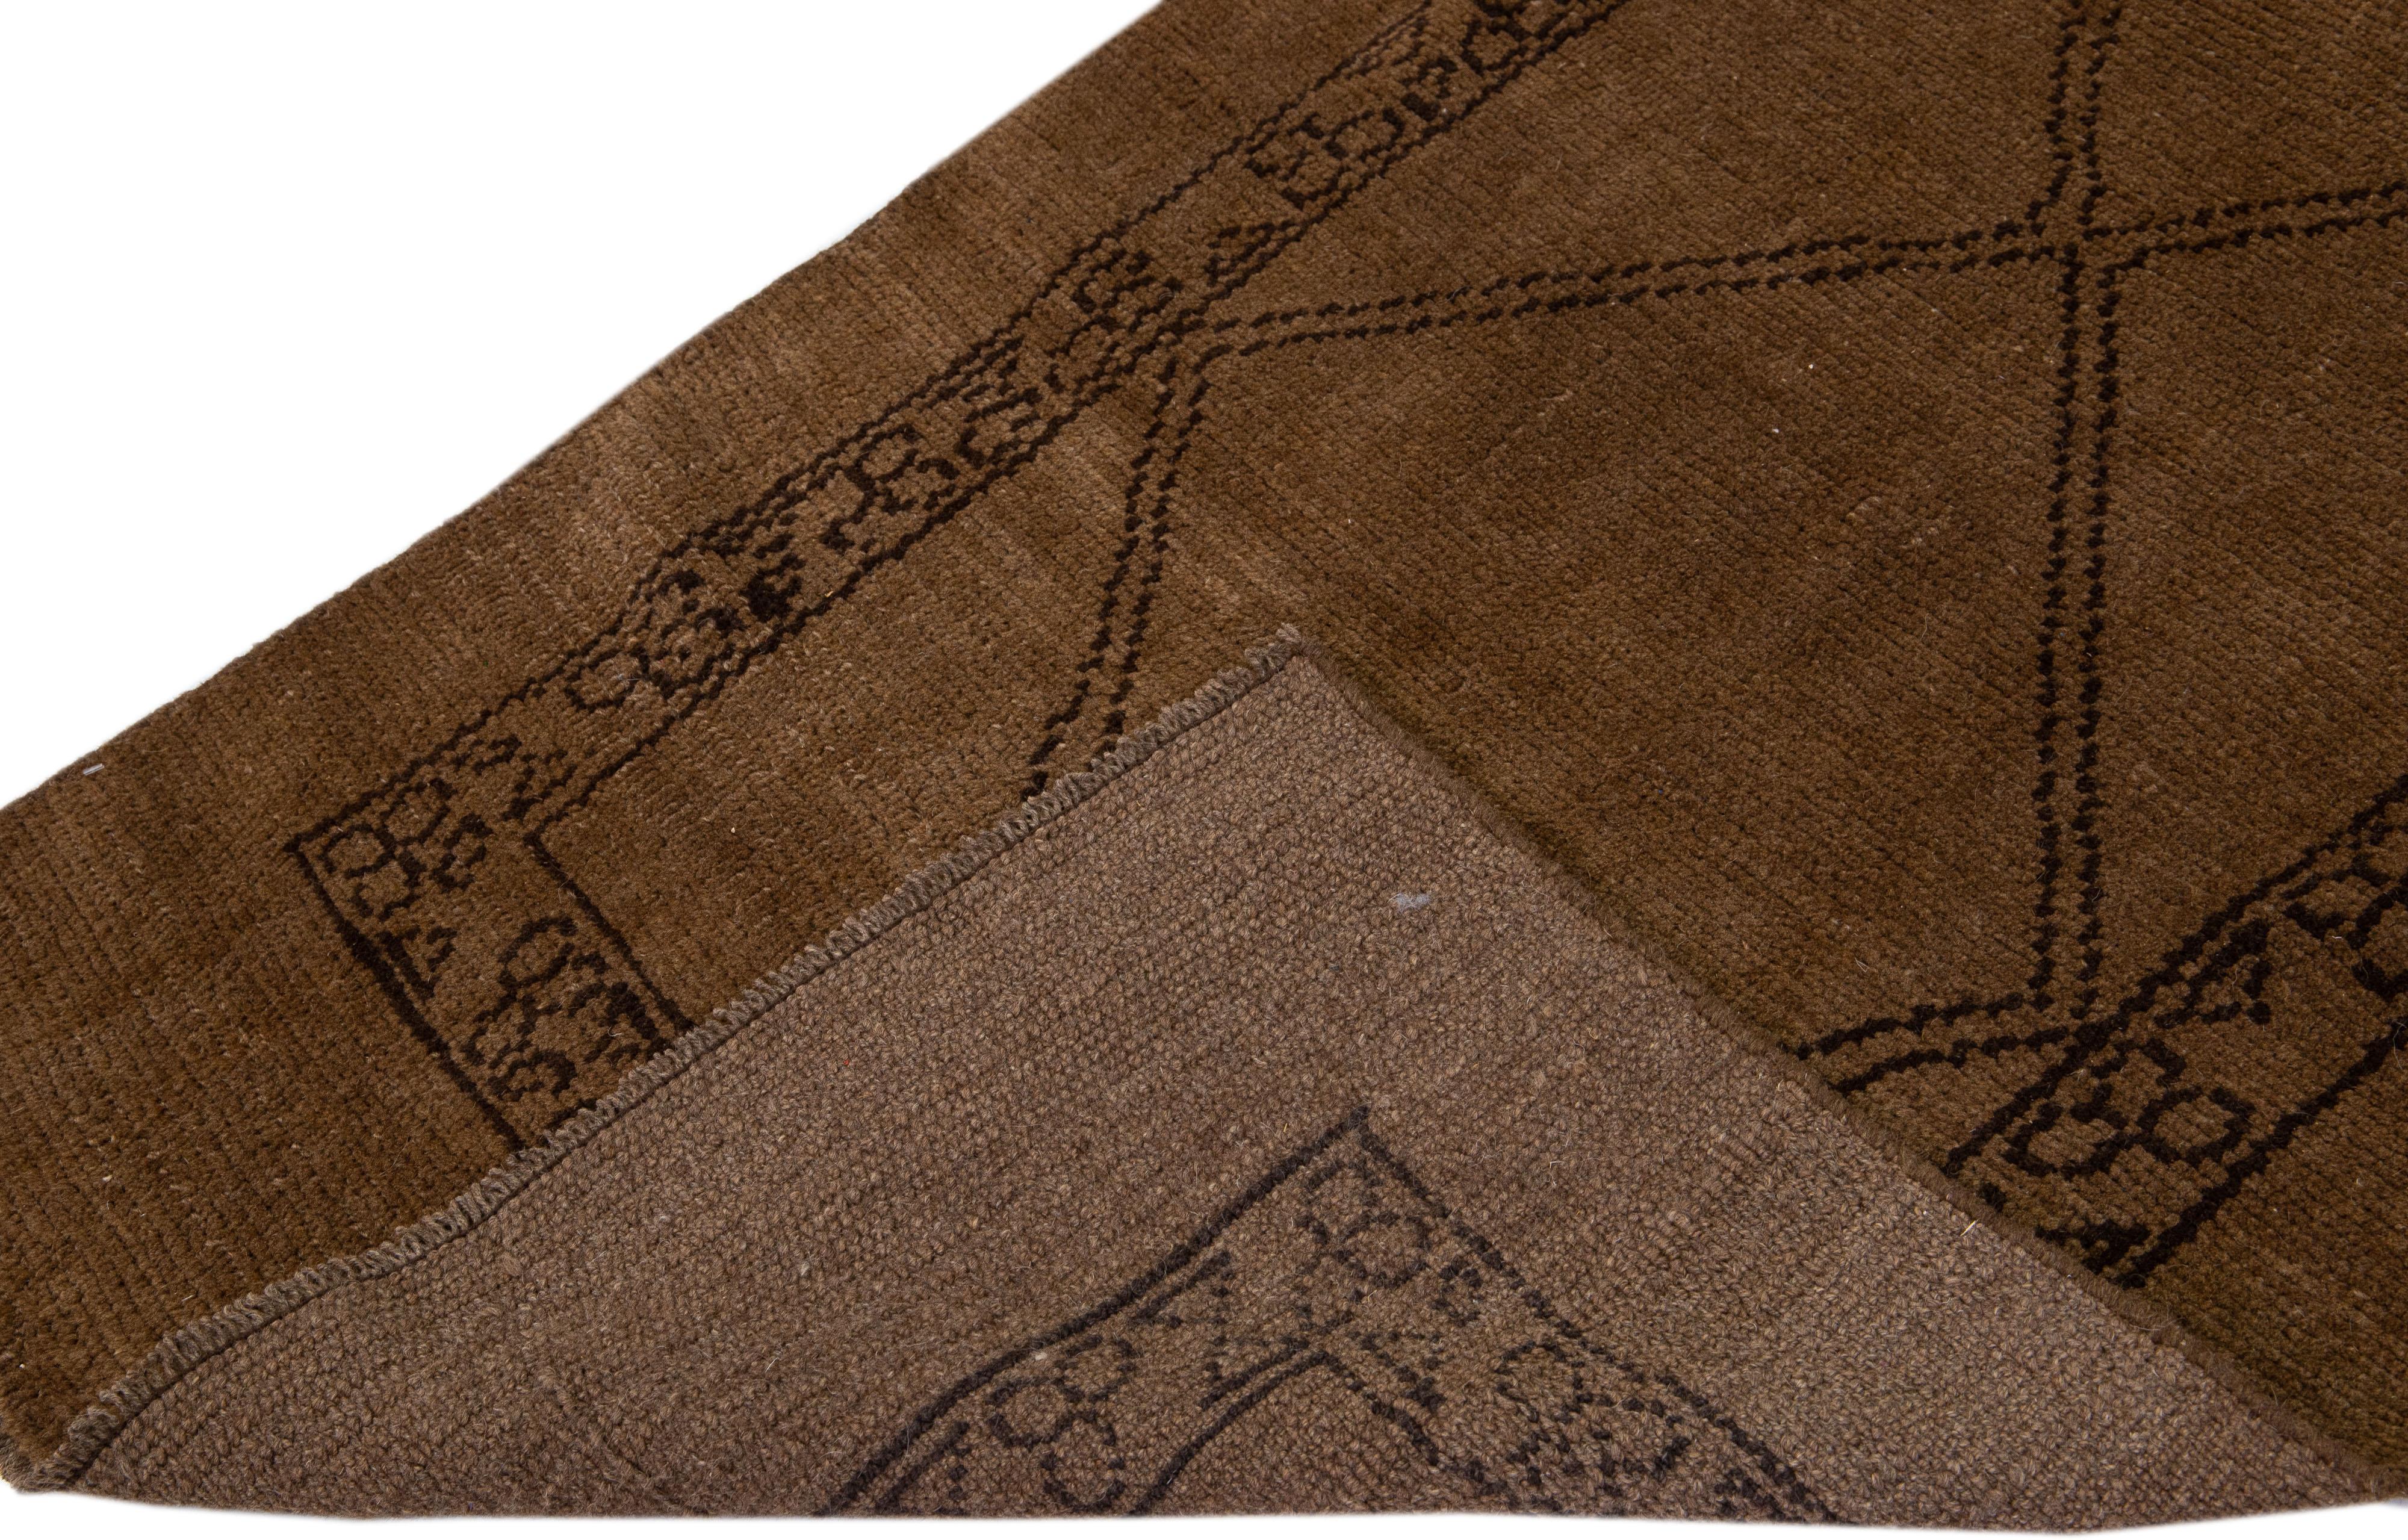 This Beautiful Moroccan-style handmade wool runner makes part of our Northwest collection and features a brown color field and beige accents in a gorgeous geometric tribal design.

This rug measures: 3'4